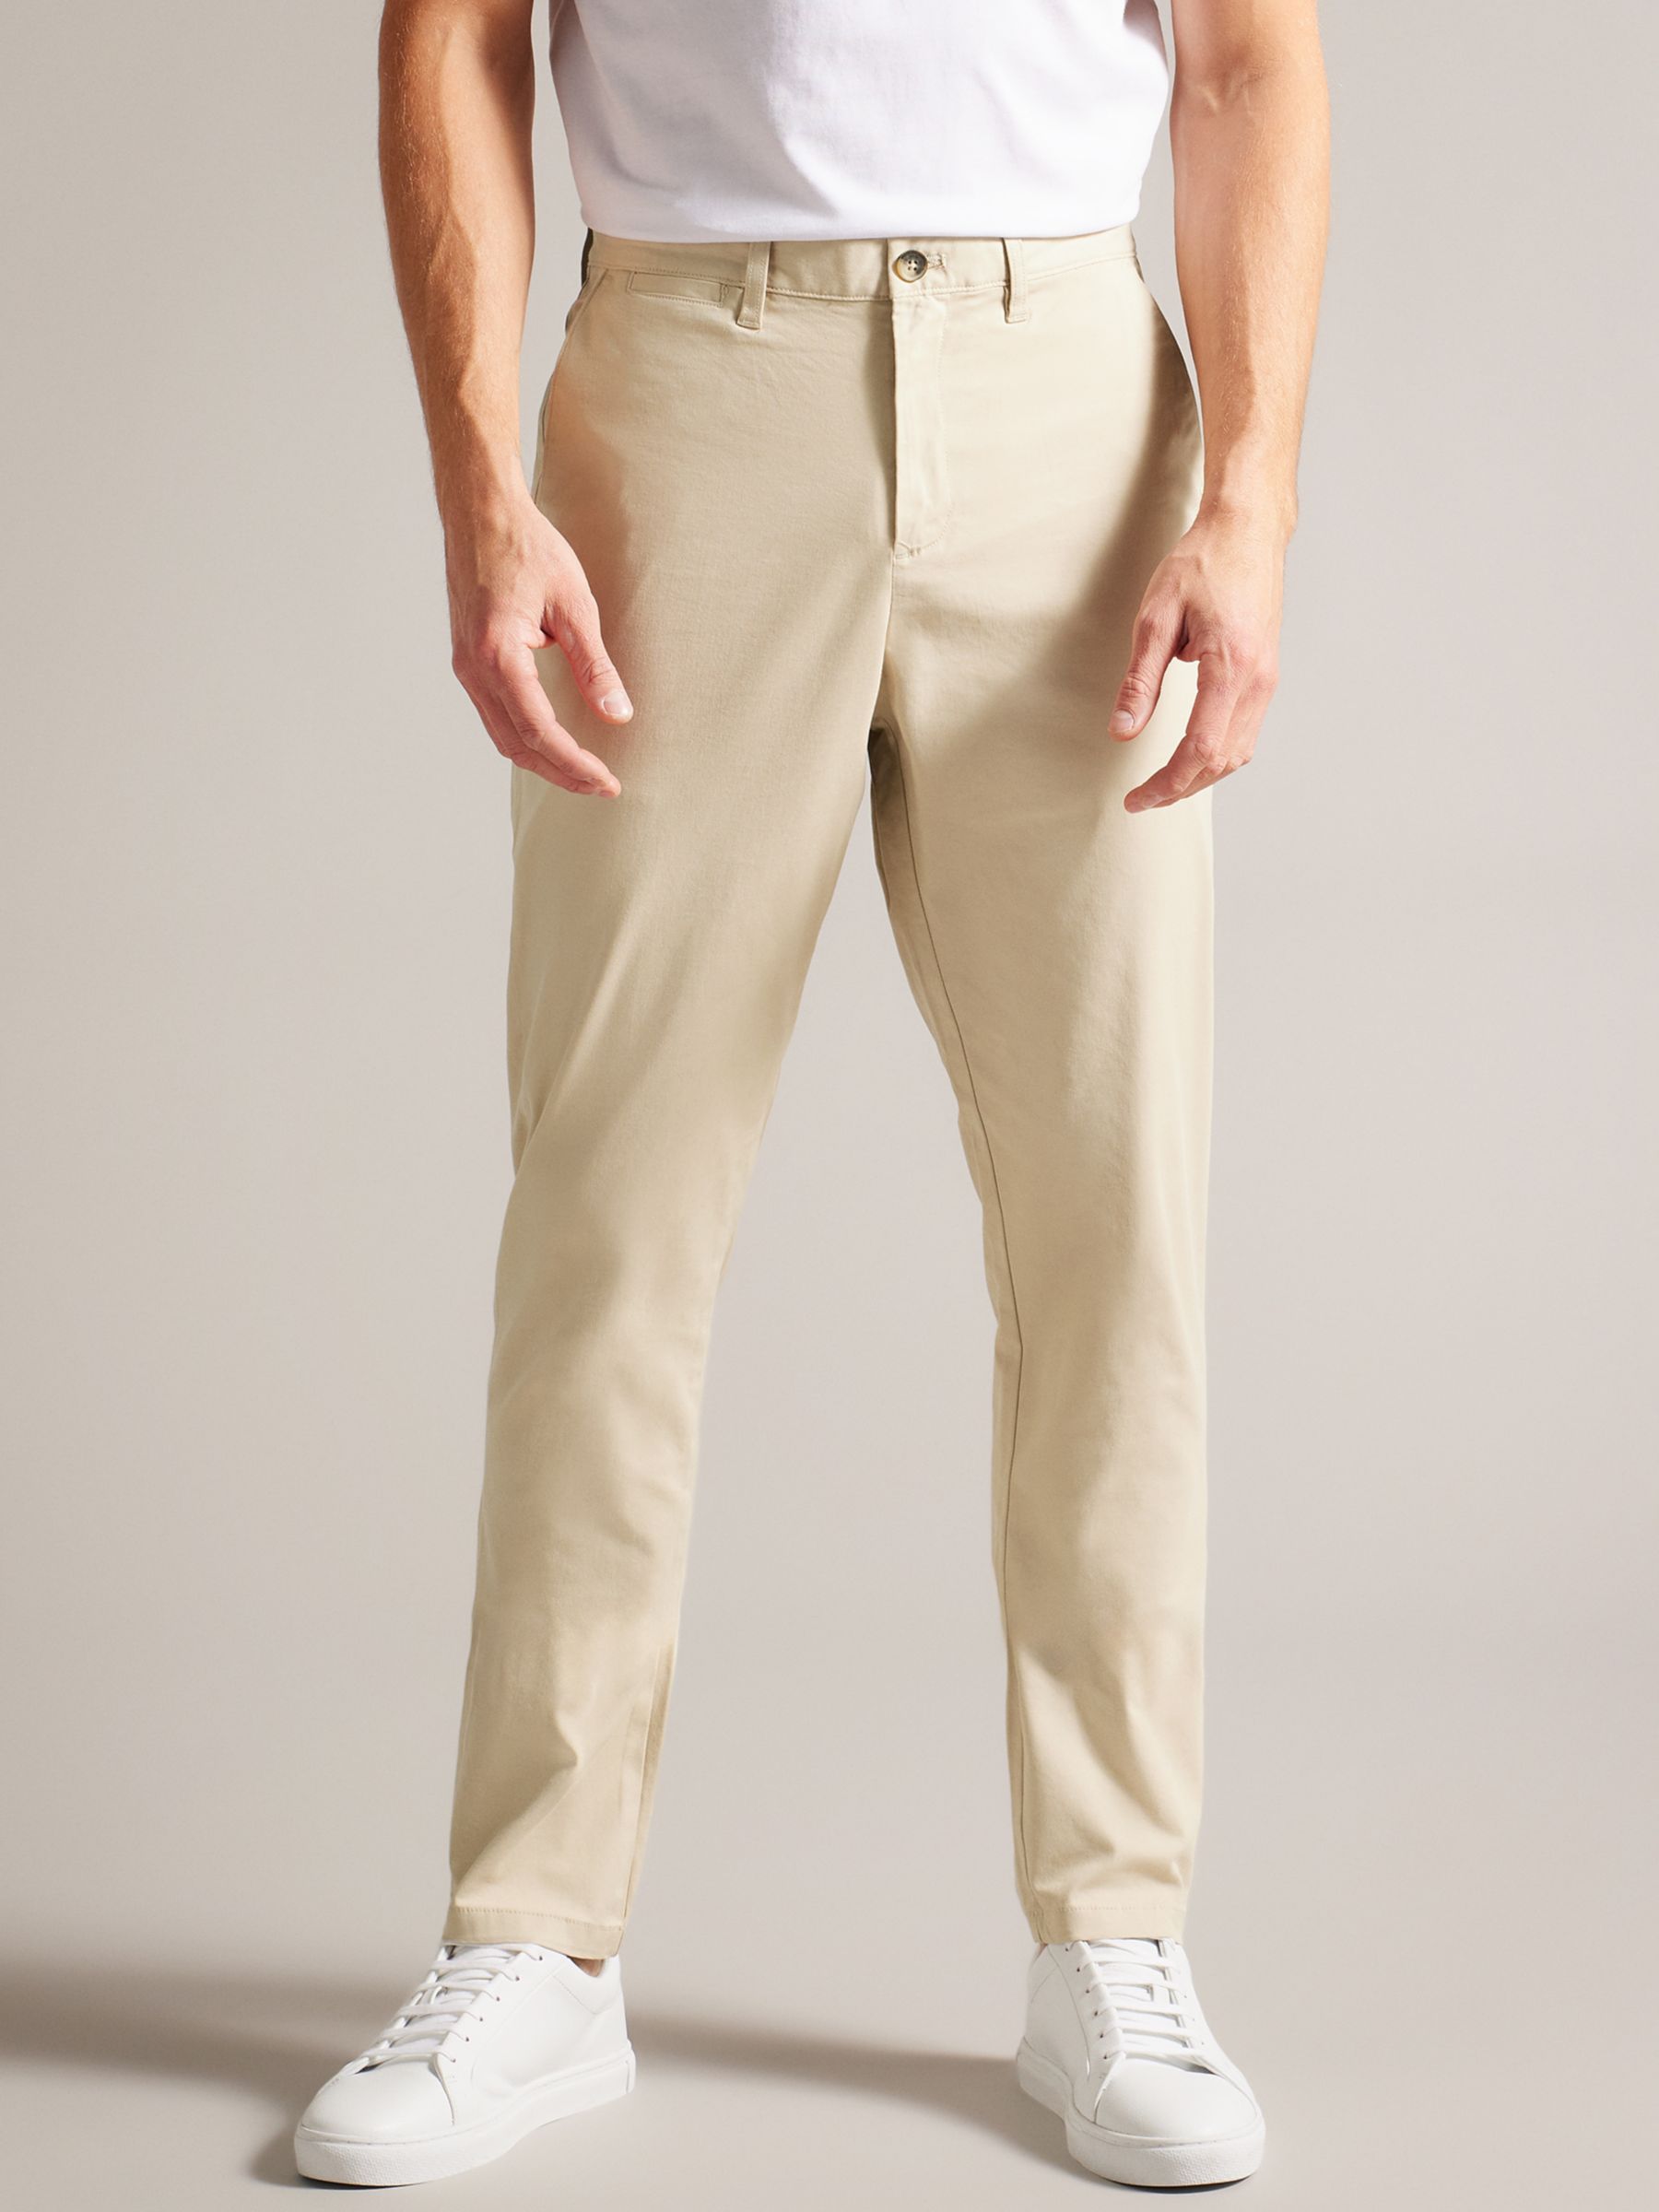 Buy Ted Baker Haybrn Regular Fit Textured Chino Trousers, Light Grey Online at johnlewis.com